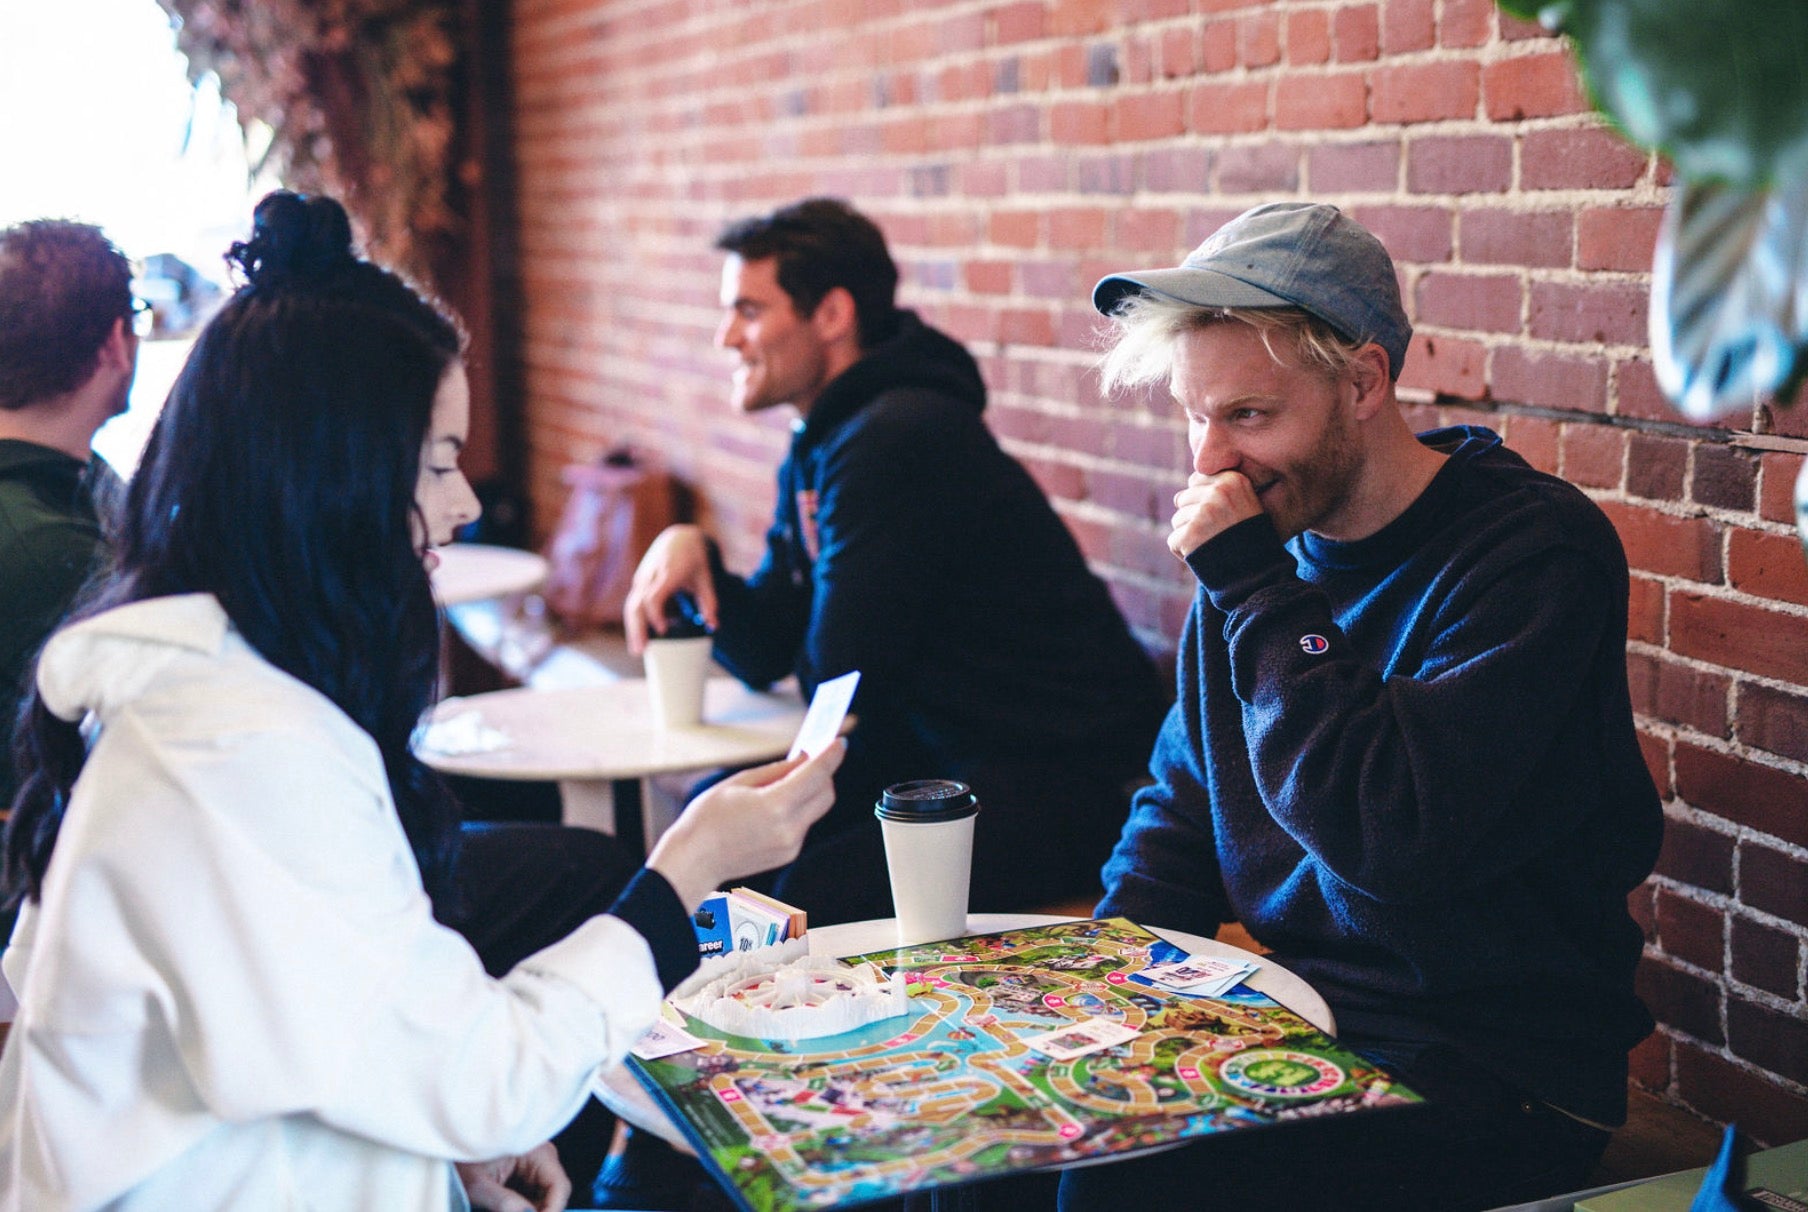 The best two play board games for couples. Couple playing board games at a cafe.